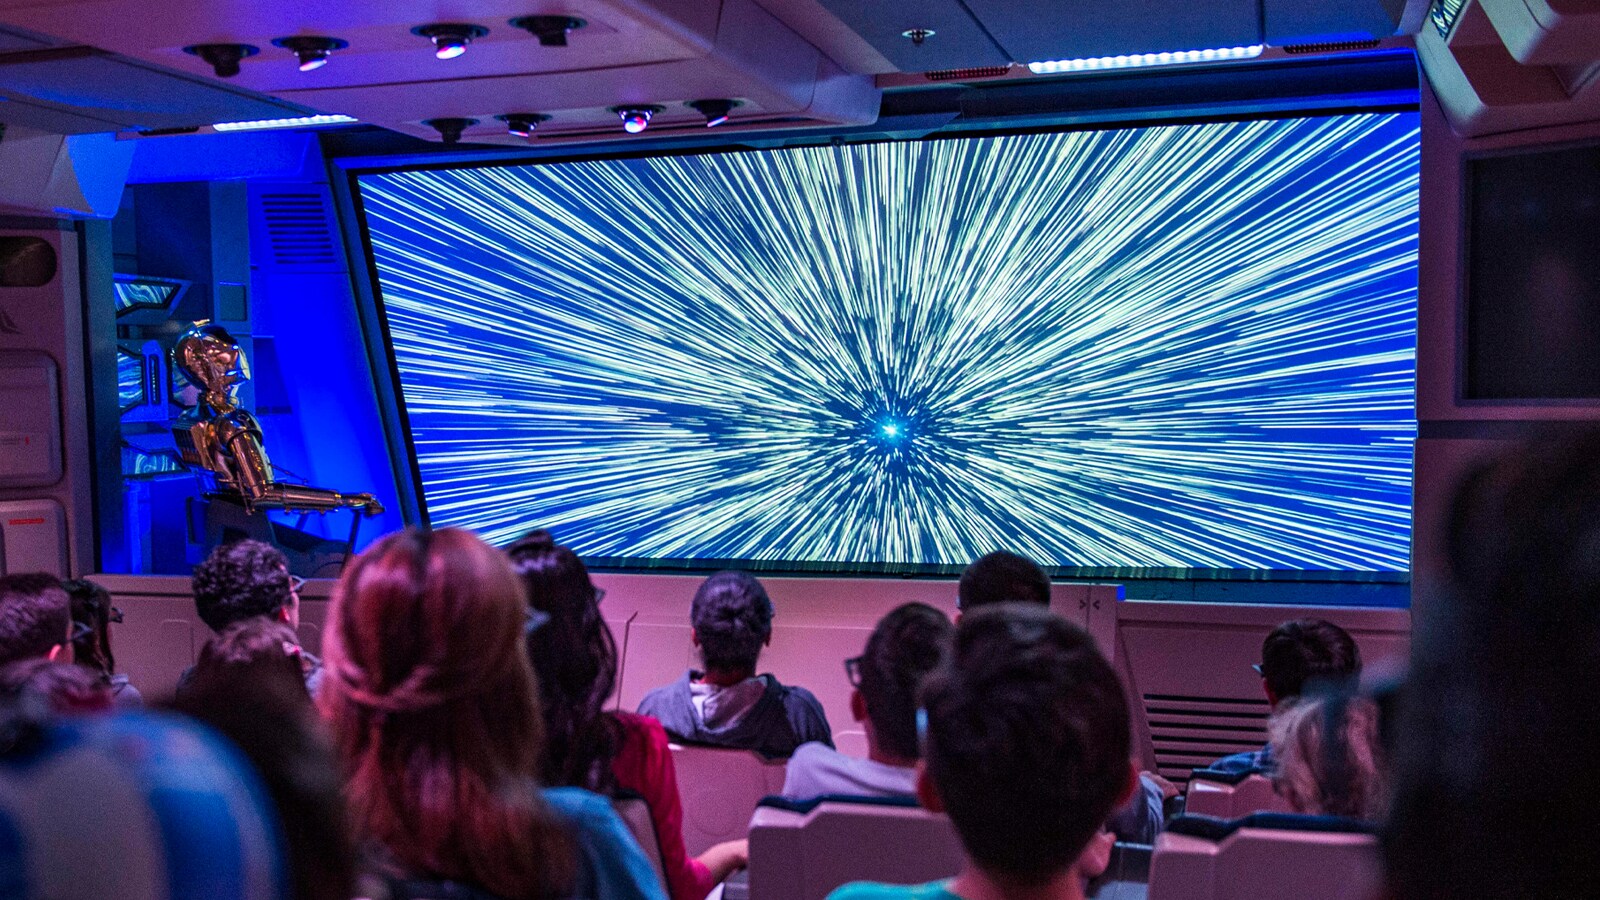 Season of the Force, New Star Tours Adventures, and Star Wars: Galaxy’s Edge Surprises Coming to Disneyland Park